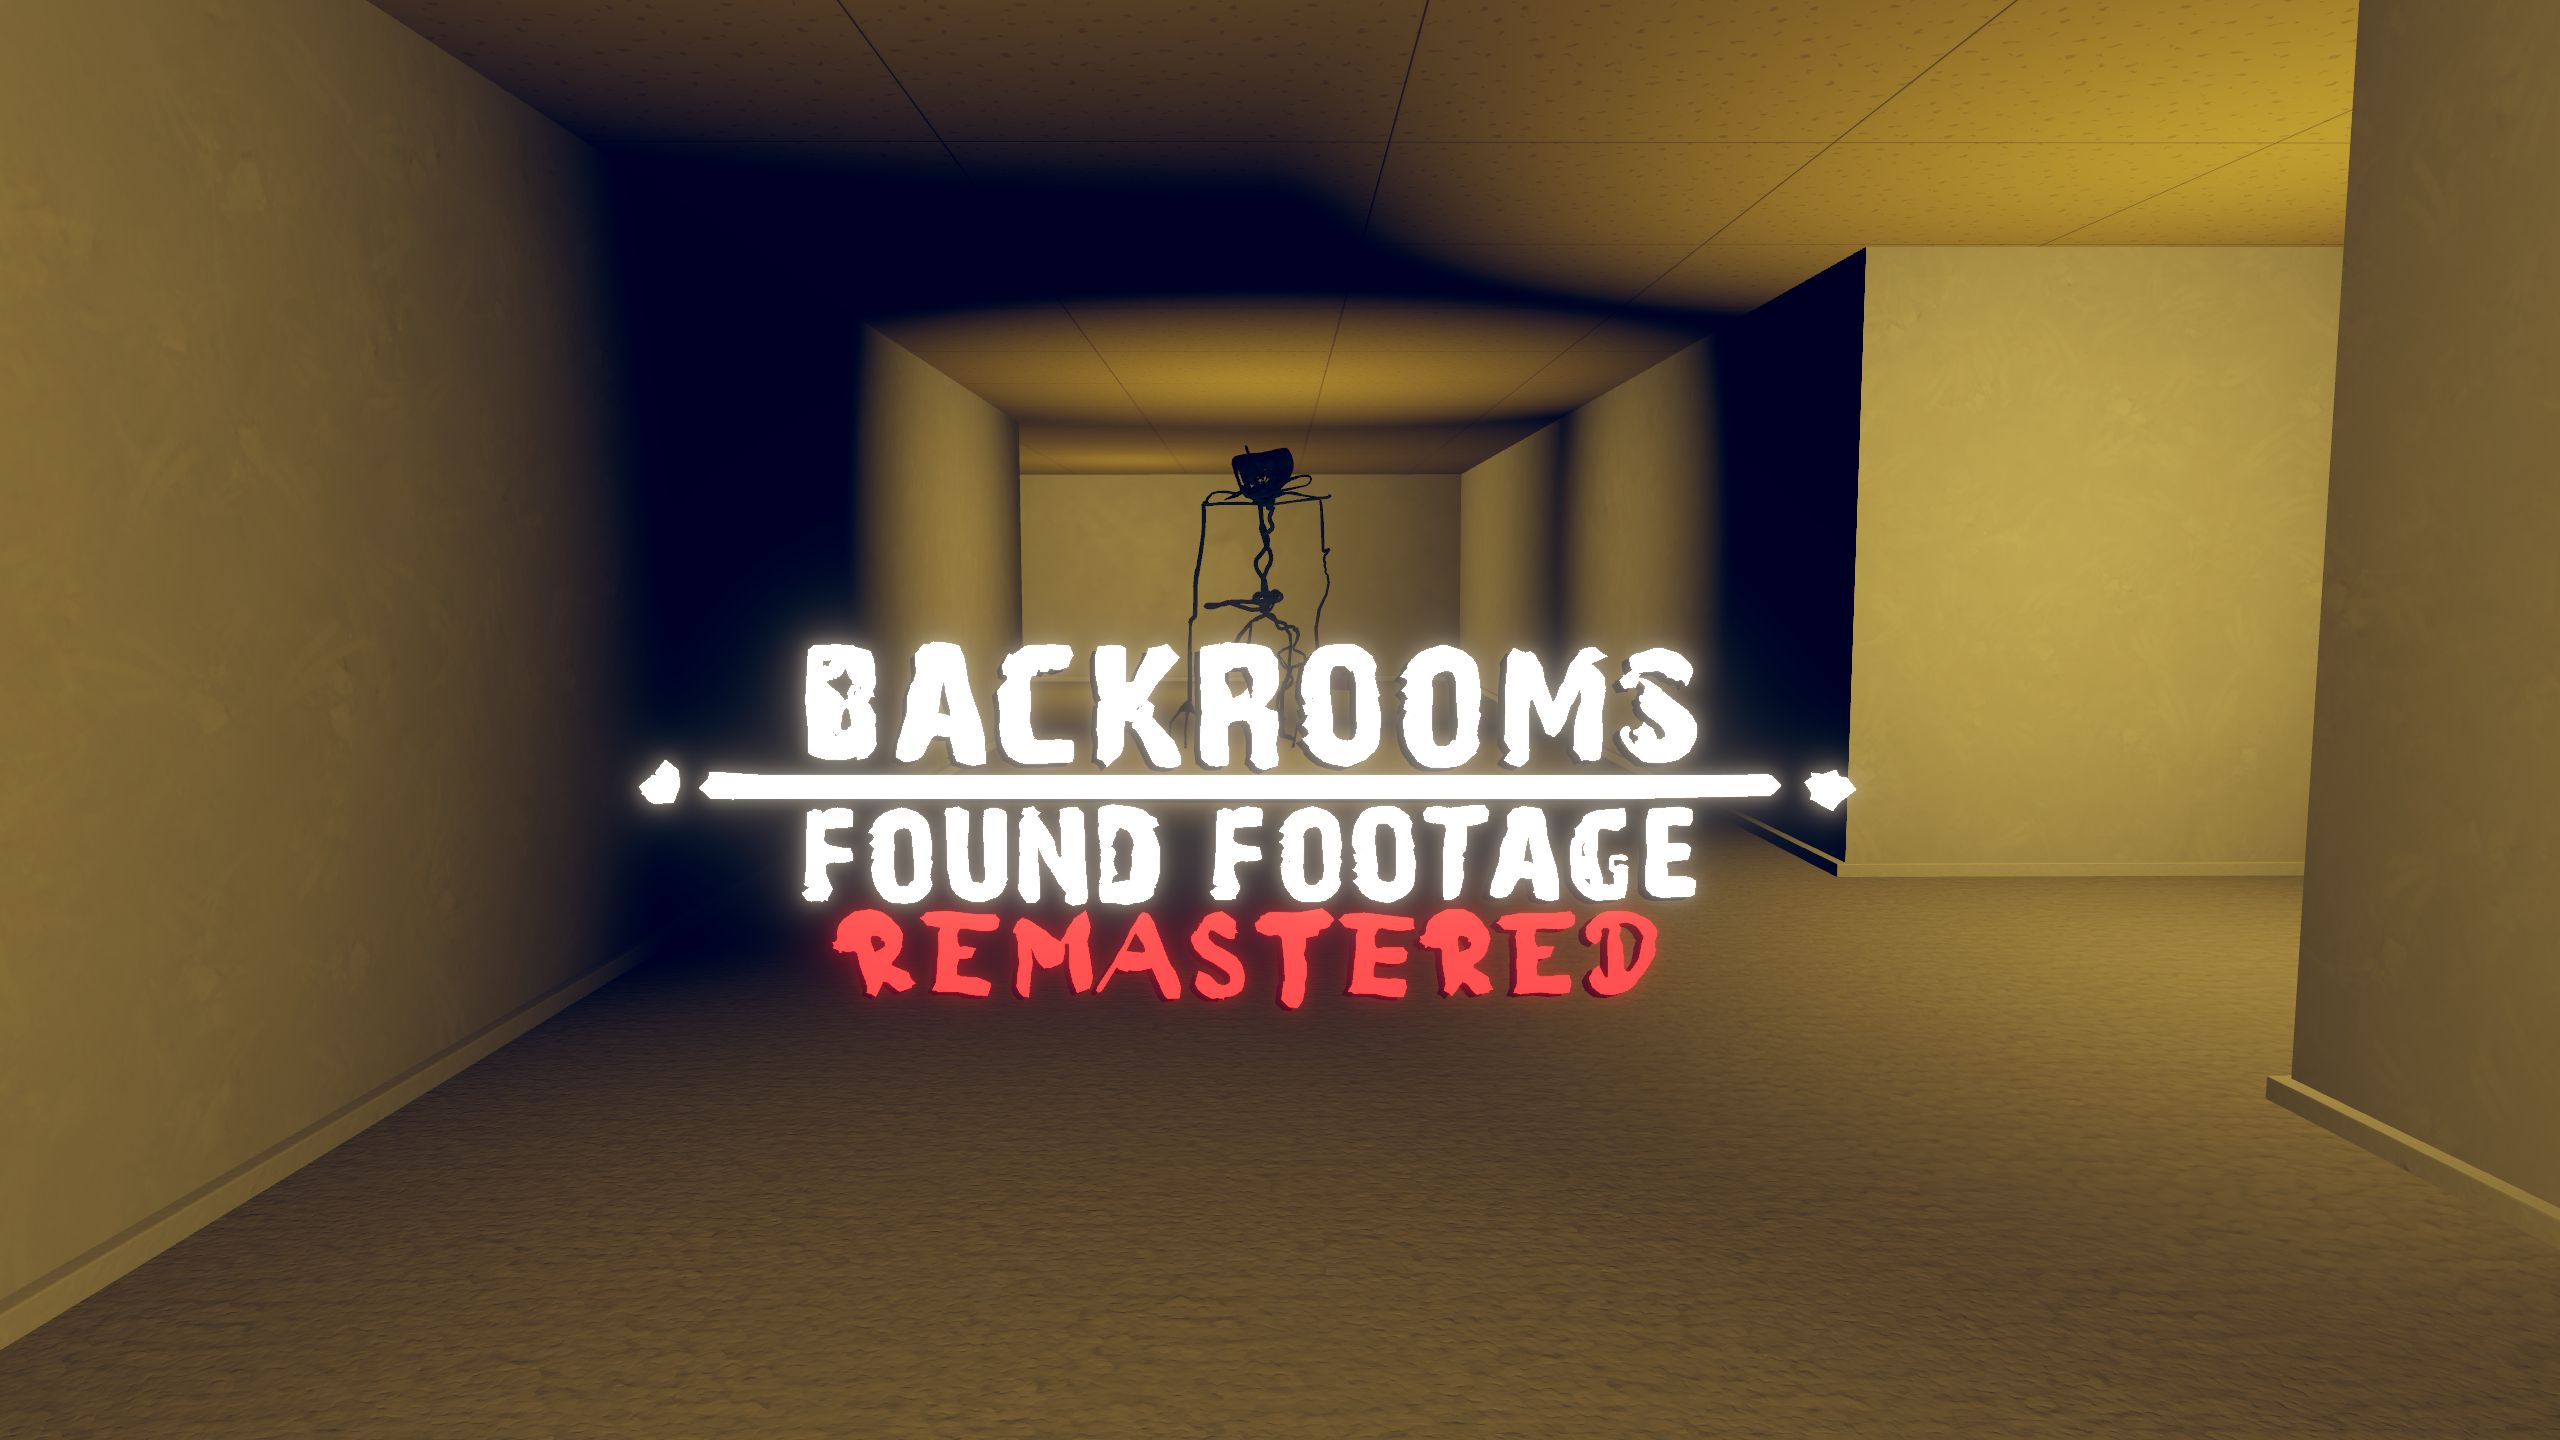 The Backrooms - Level 3 (Found Footage) 